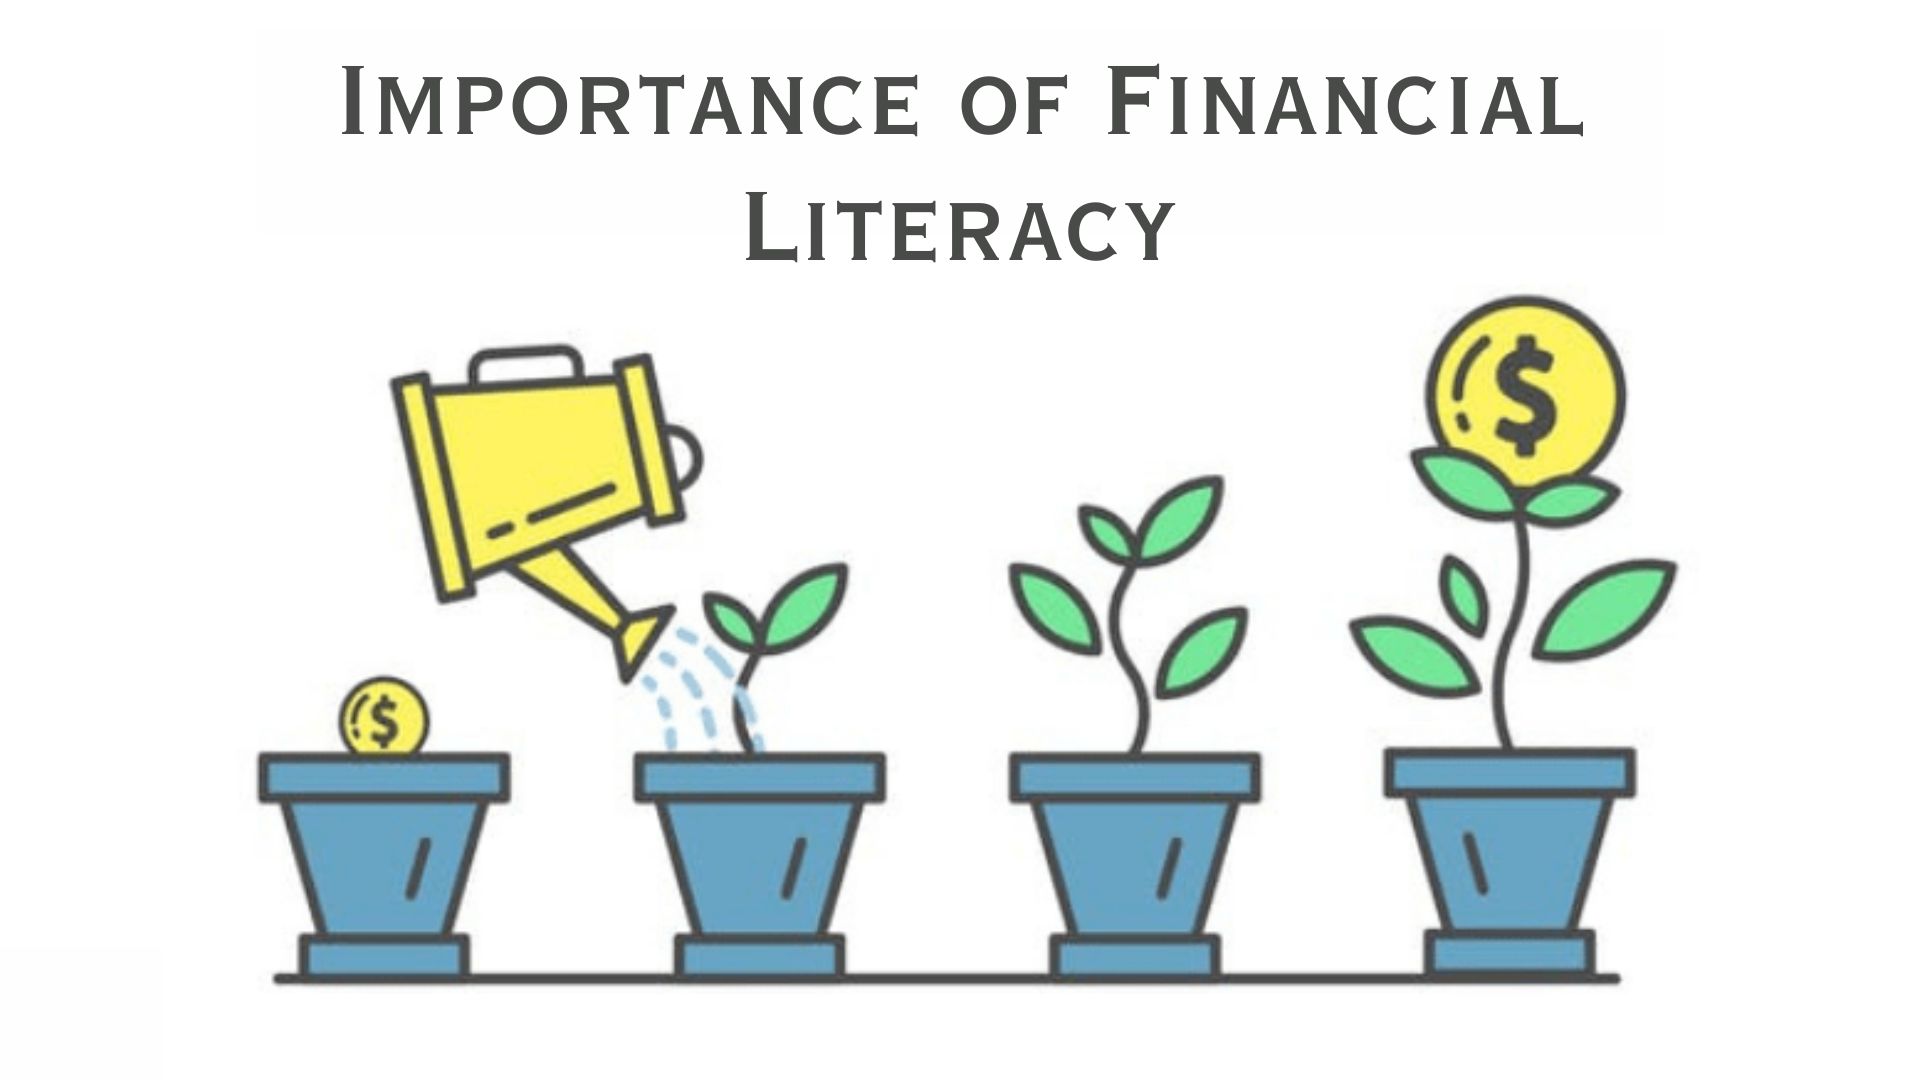 Why is Financial Literacy Important